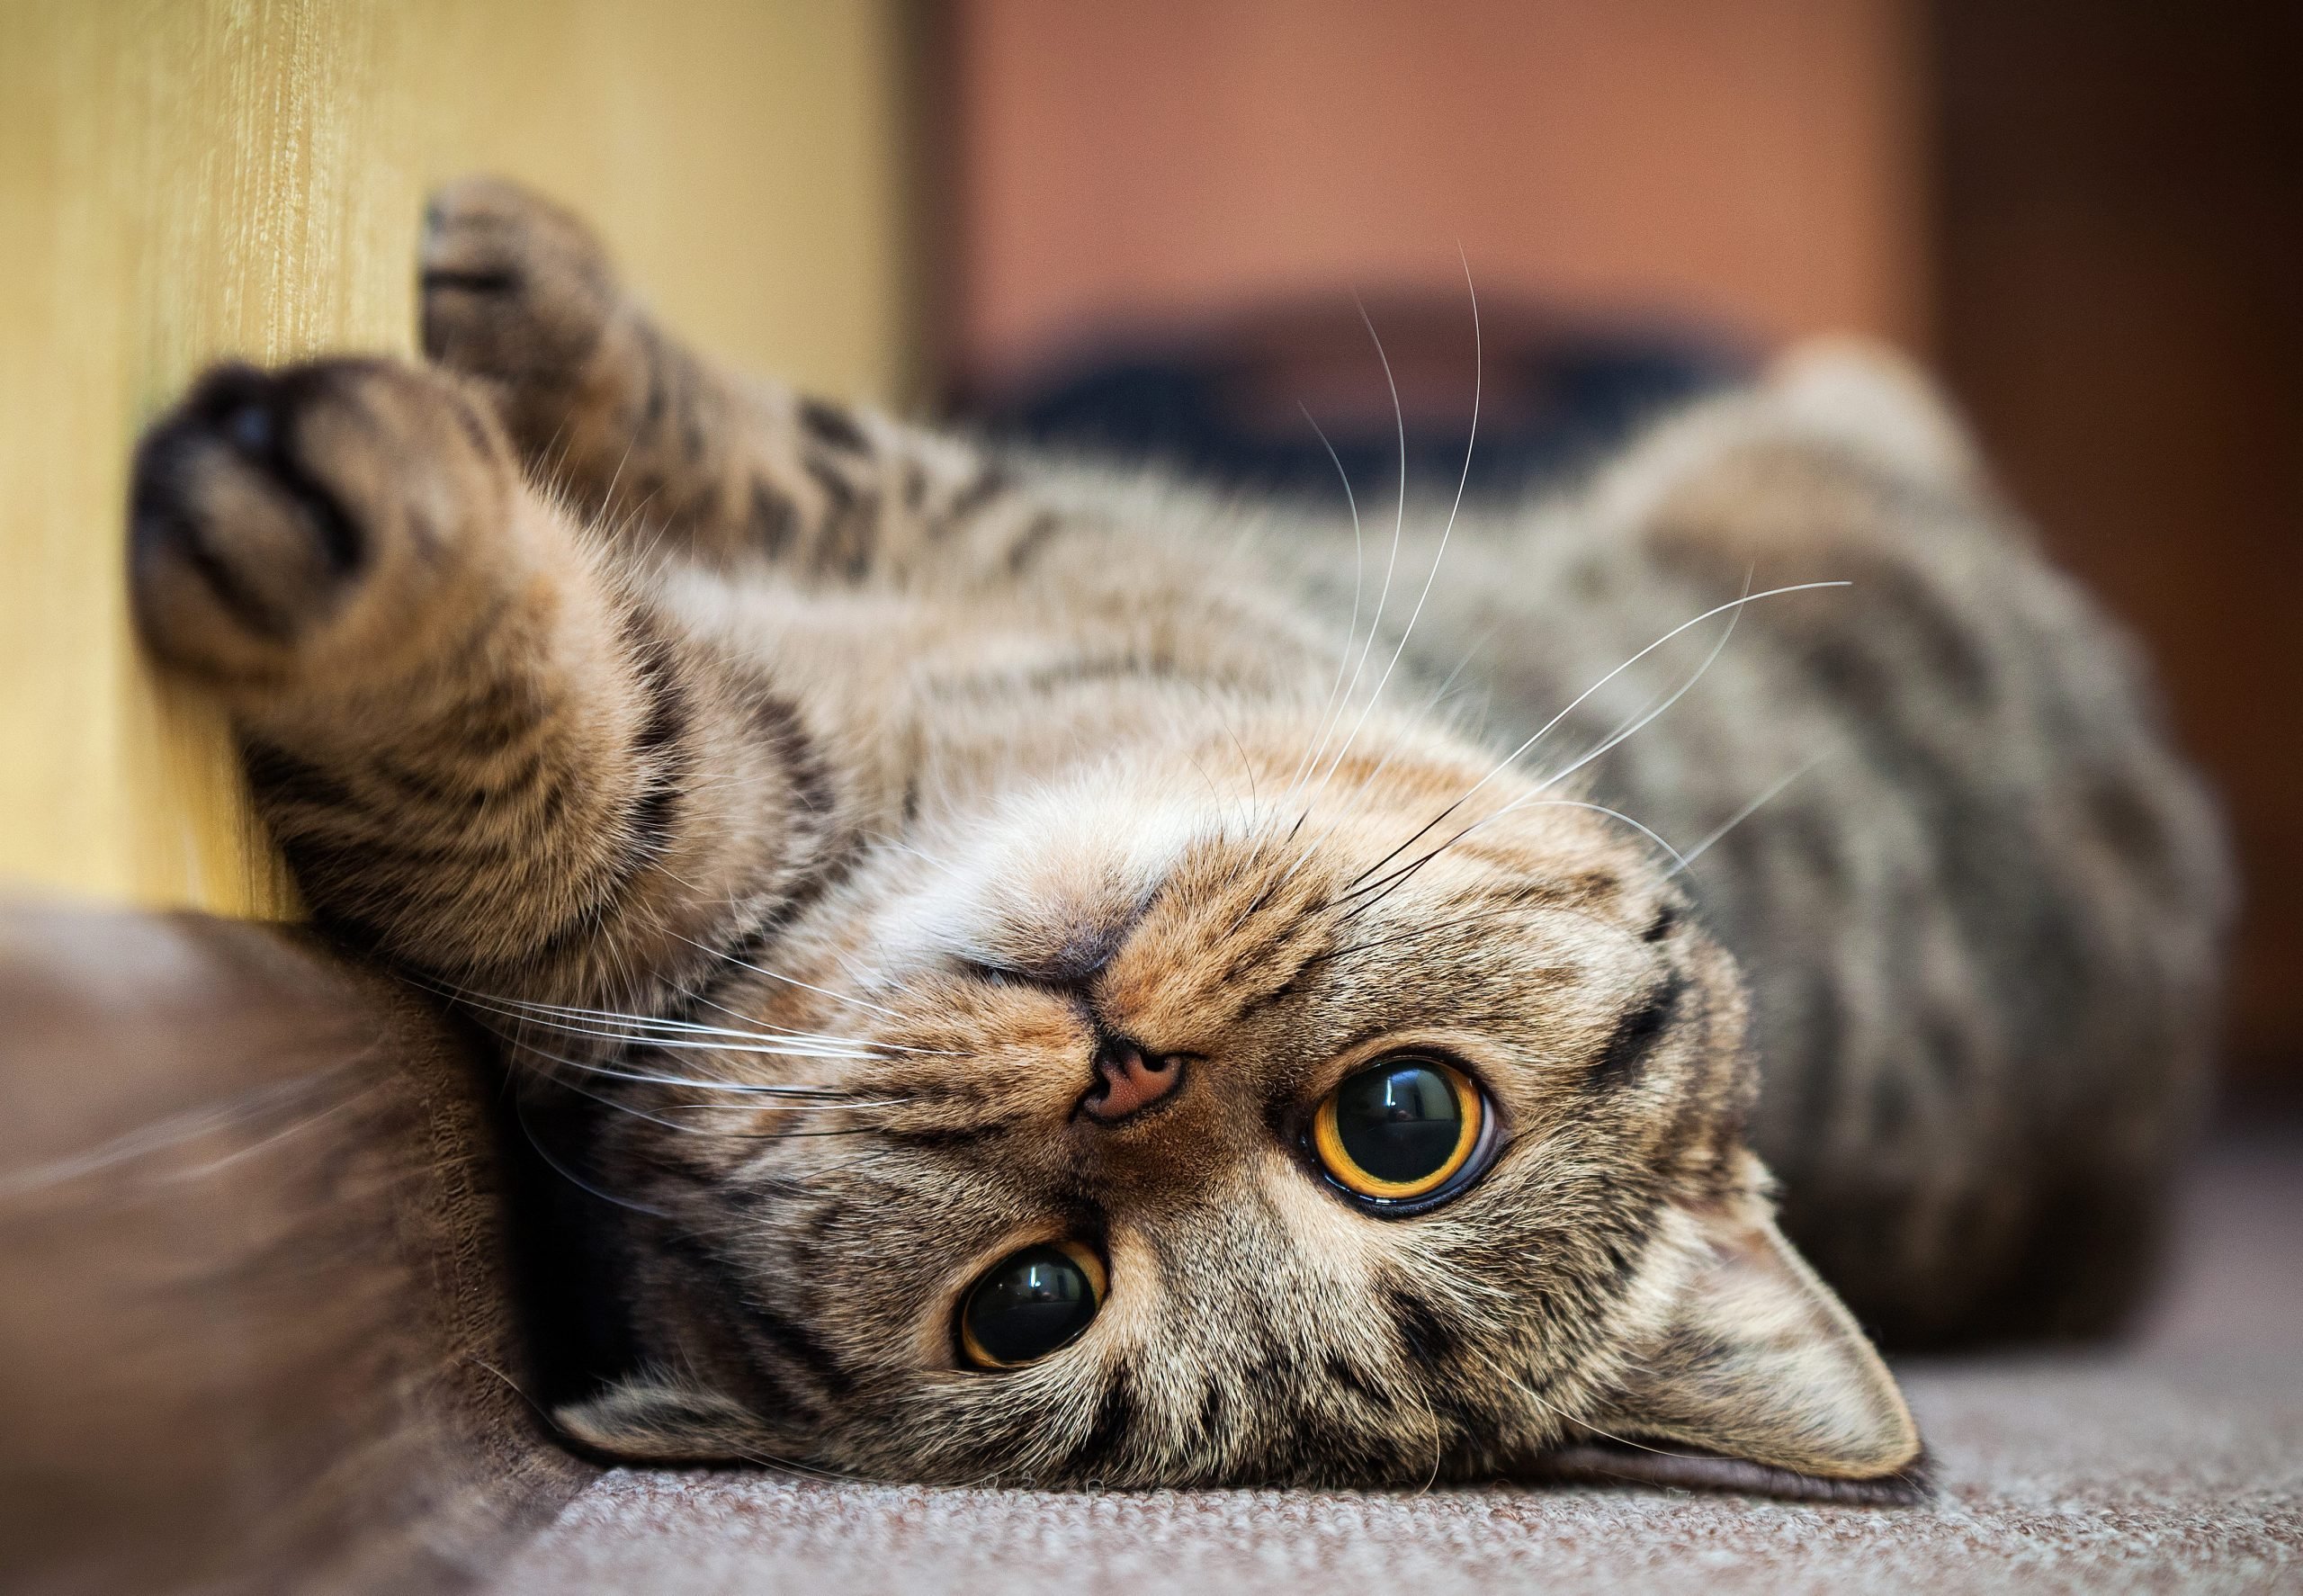 International Cat Day: 5 weird things your cat is doing and why